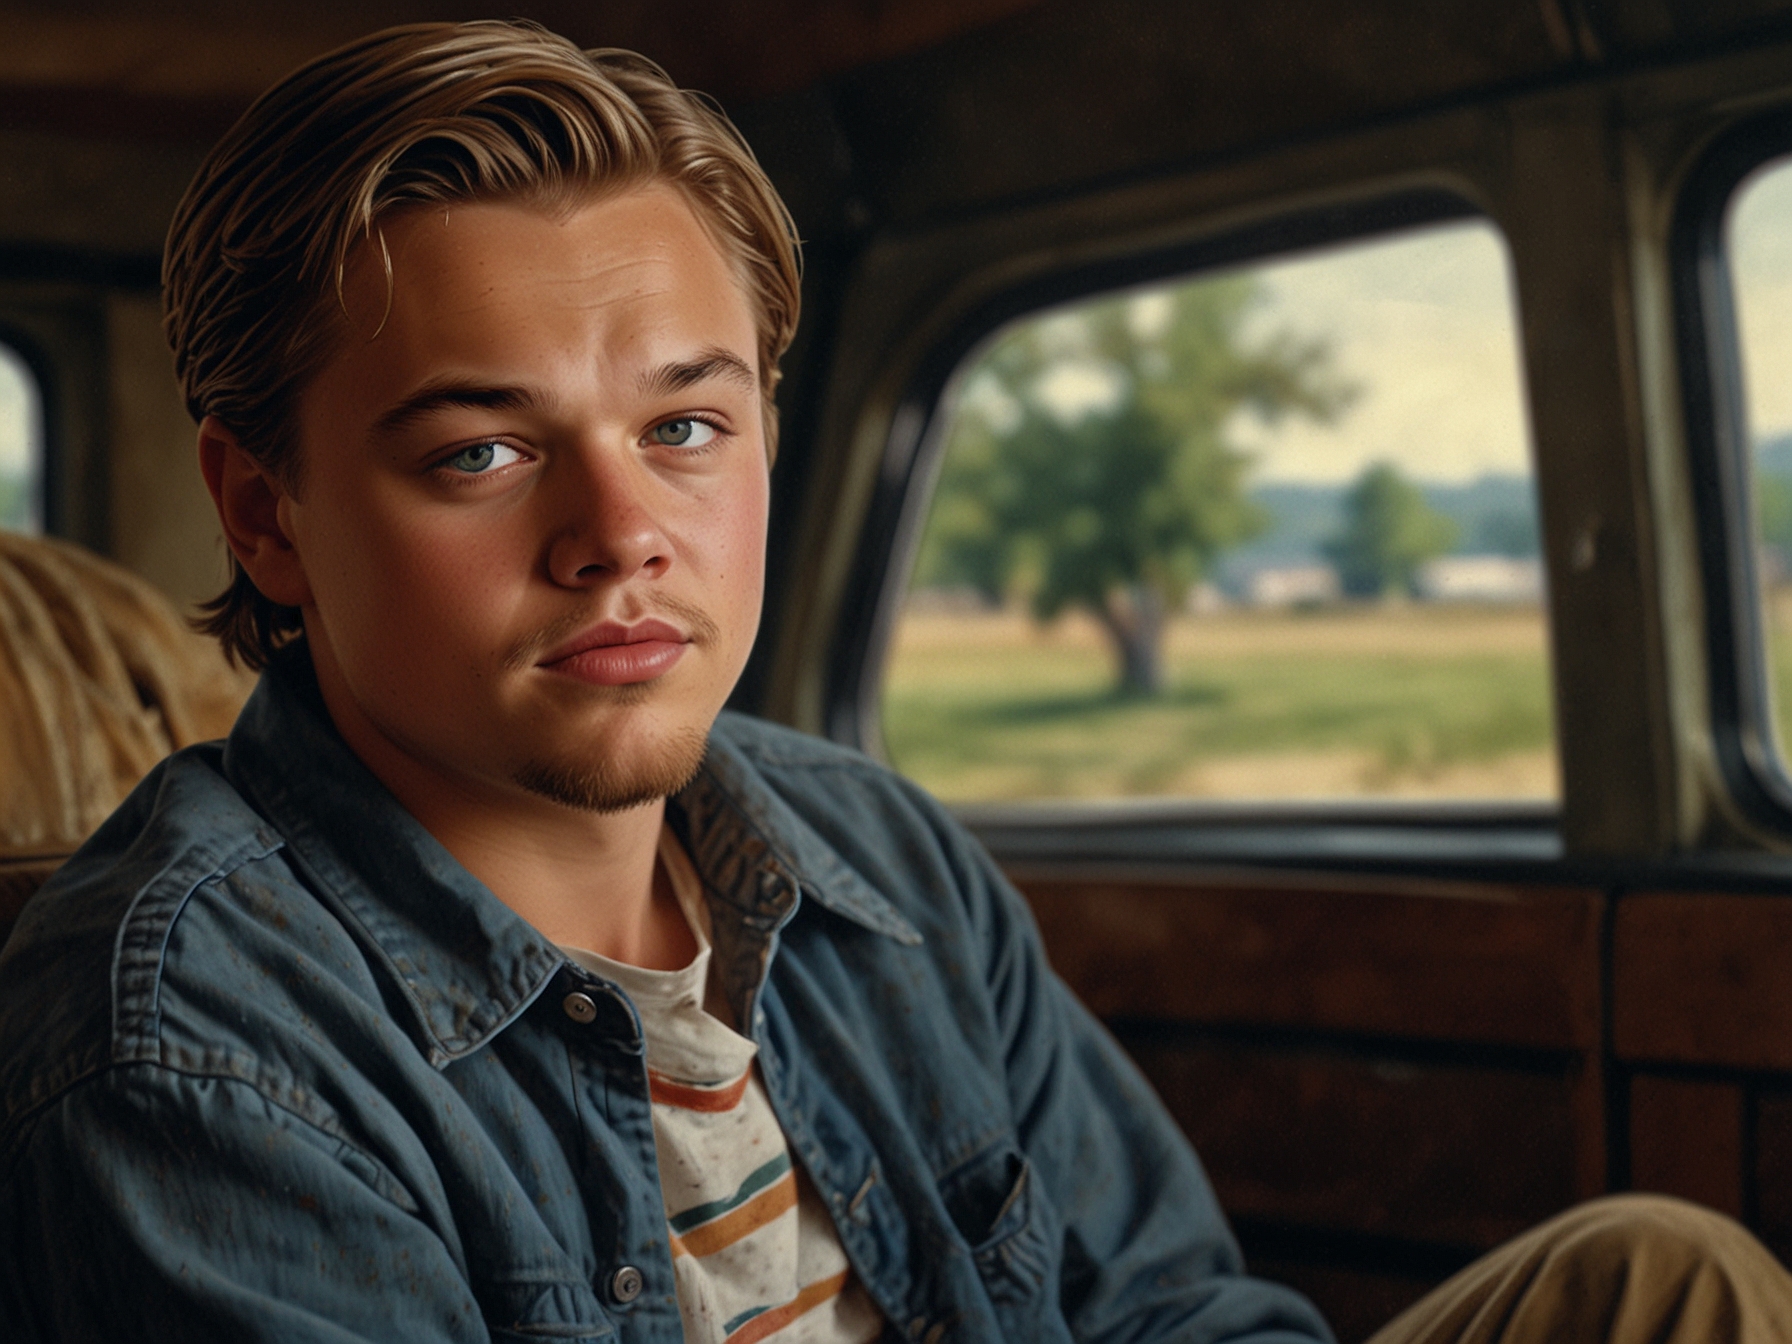 A young Leonardo DiCaprio in a scene from his breakthrough role in 'What's Eating Gilbert Grape,' which earned him an Academy Award nomination for Best Supporting Actor.